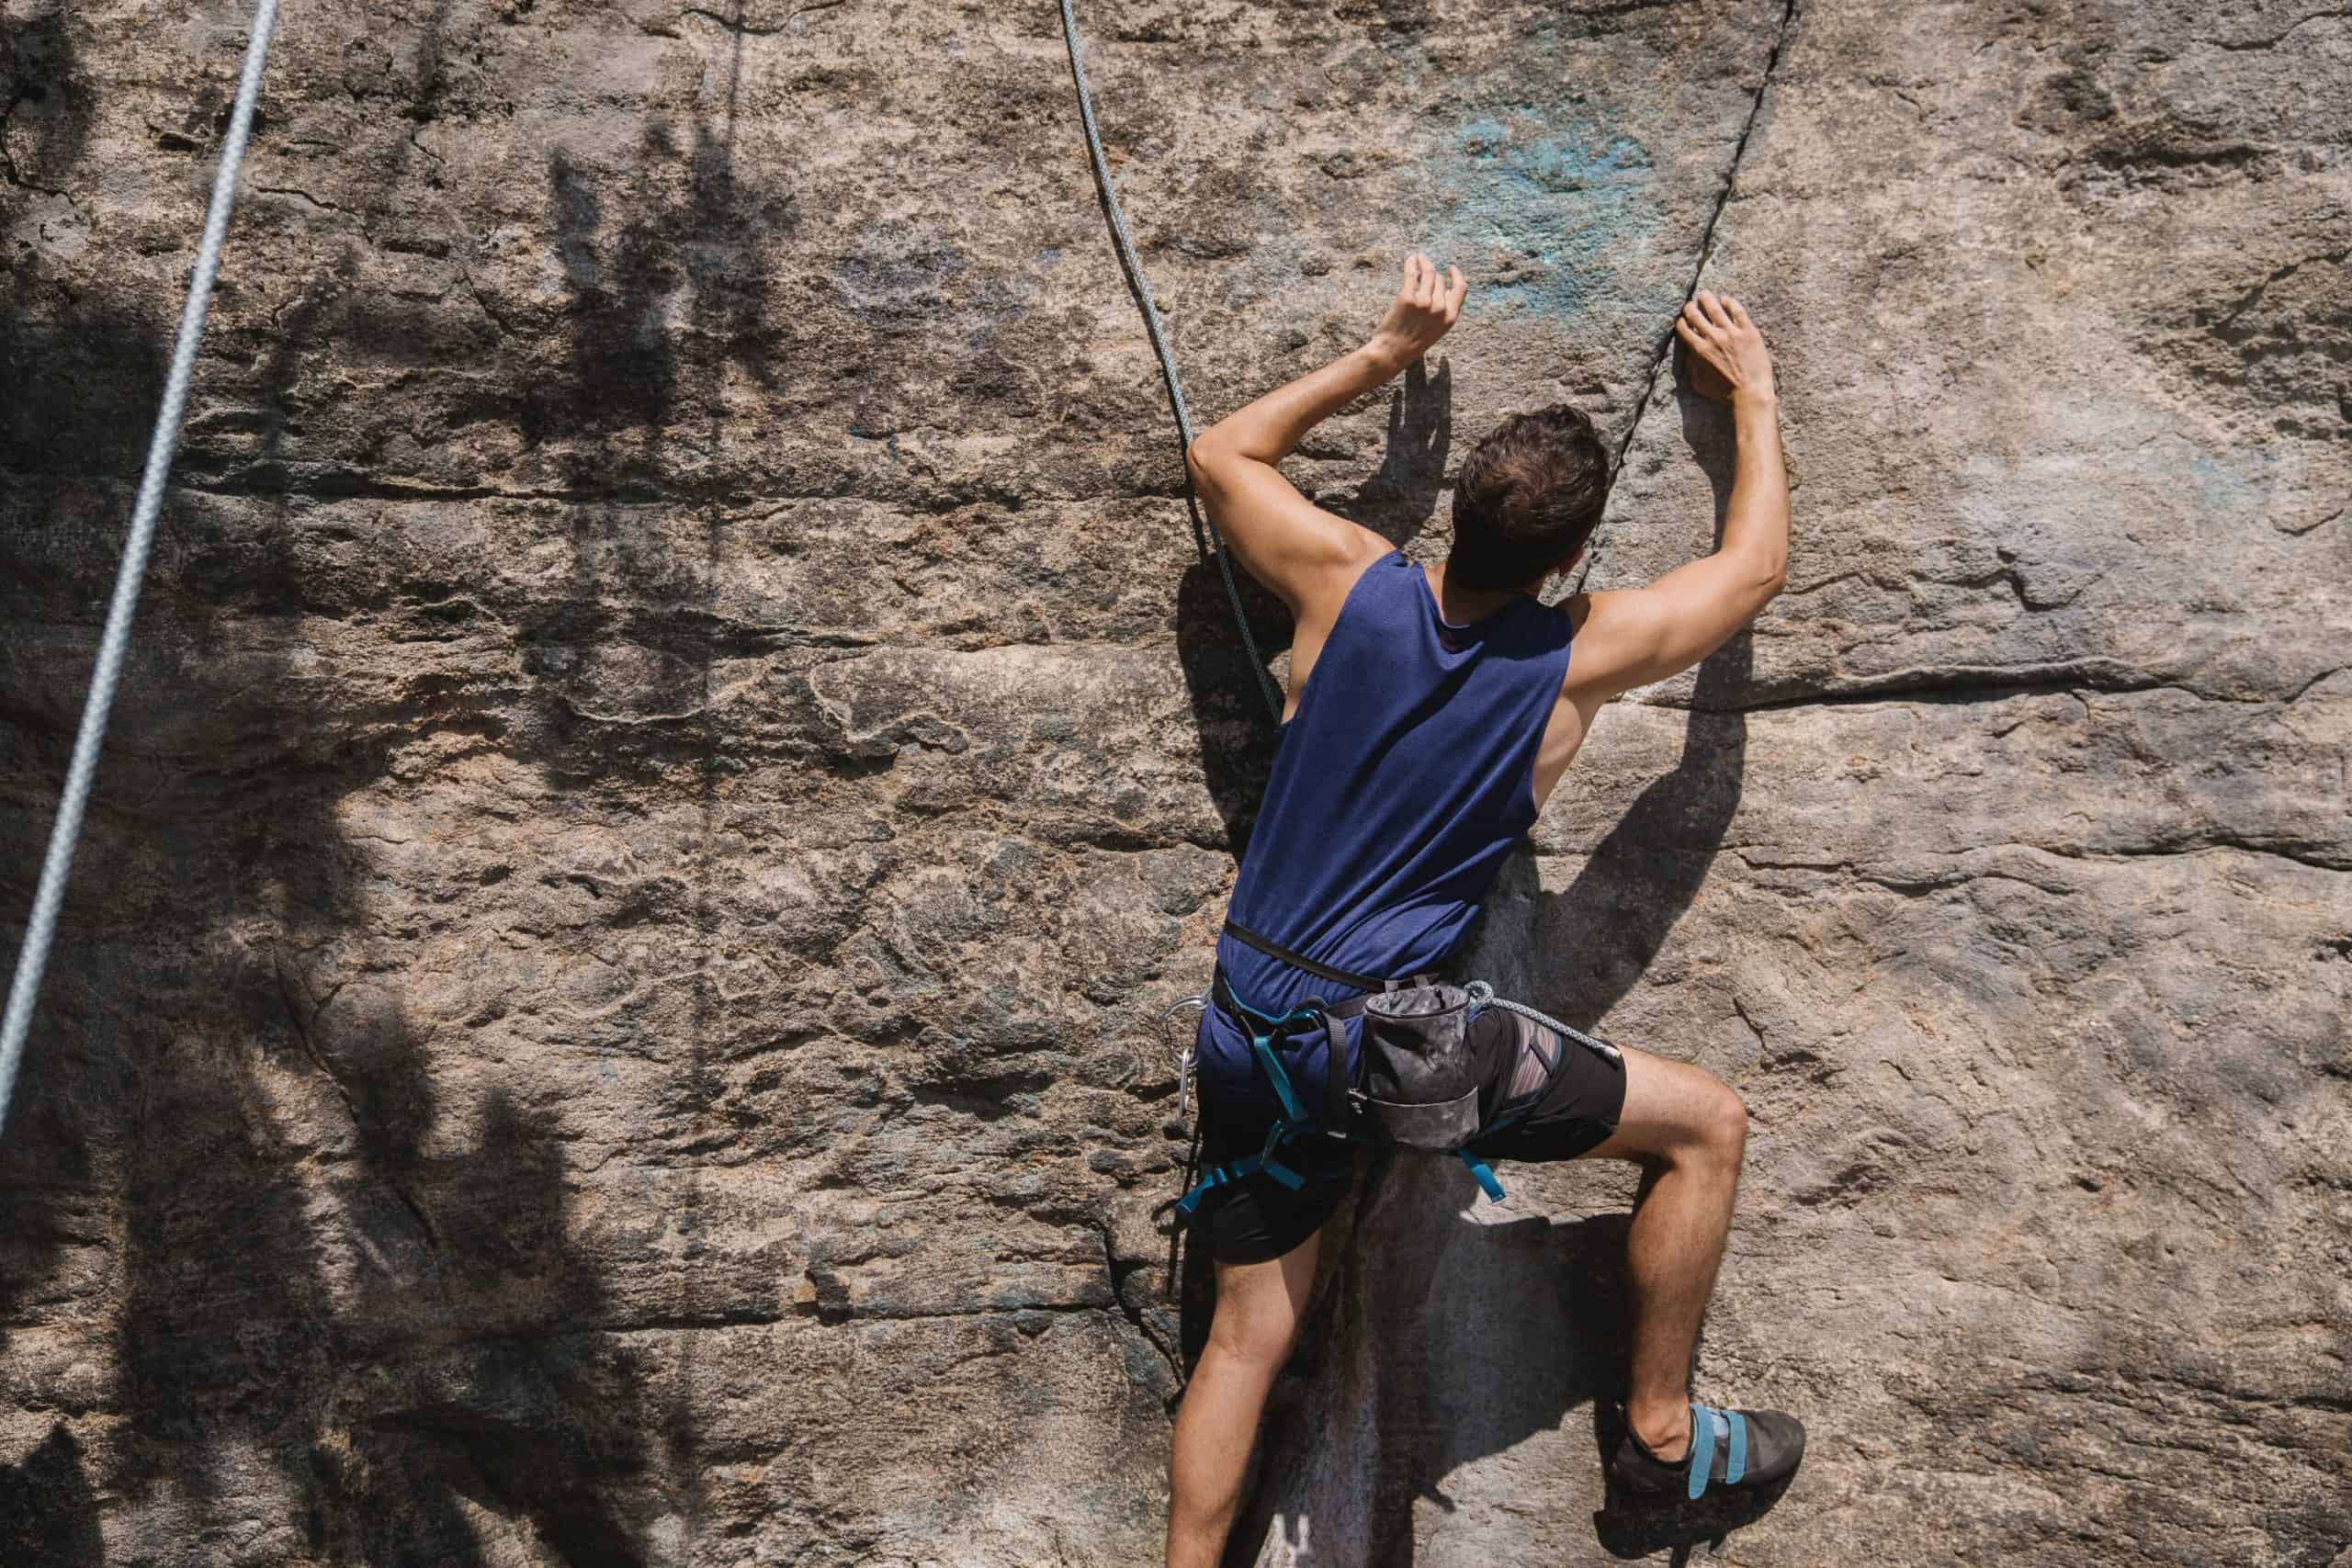 From OS to RP- the most popular styles in modern sport climbing